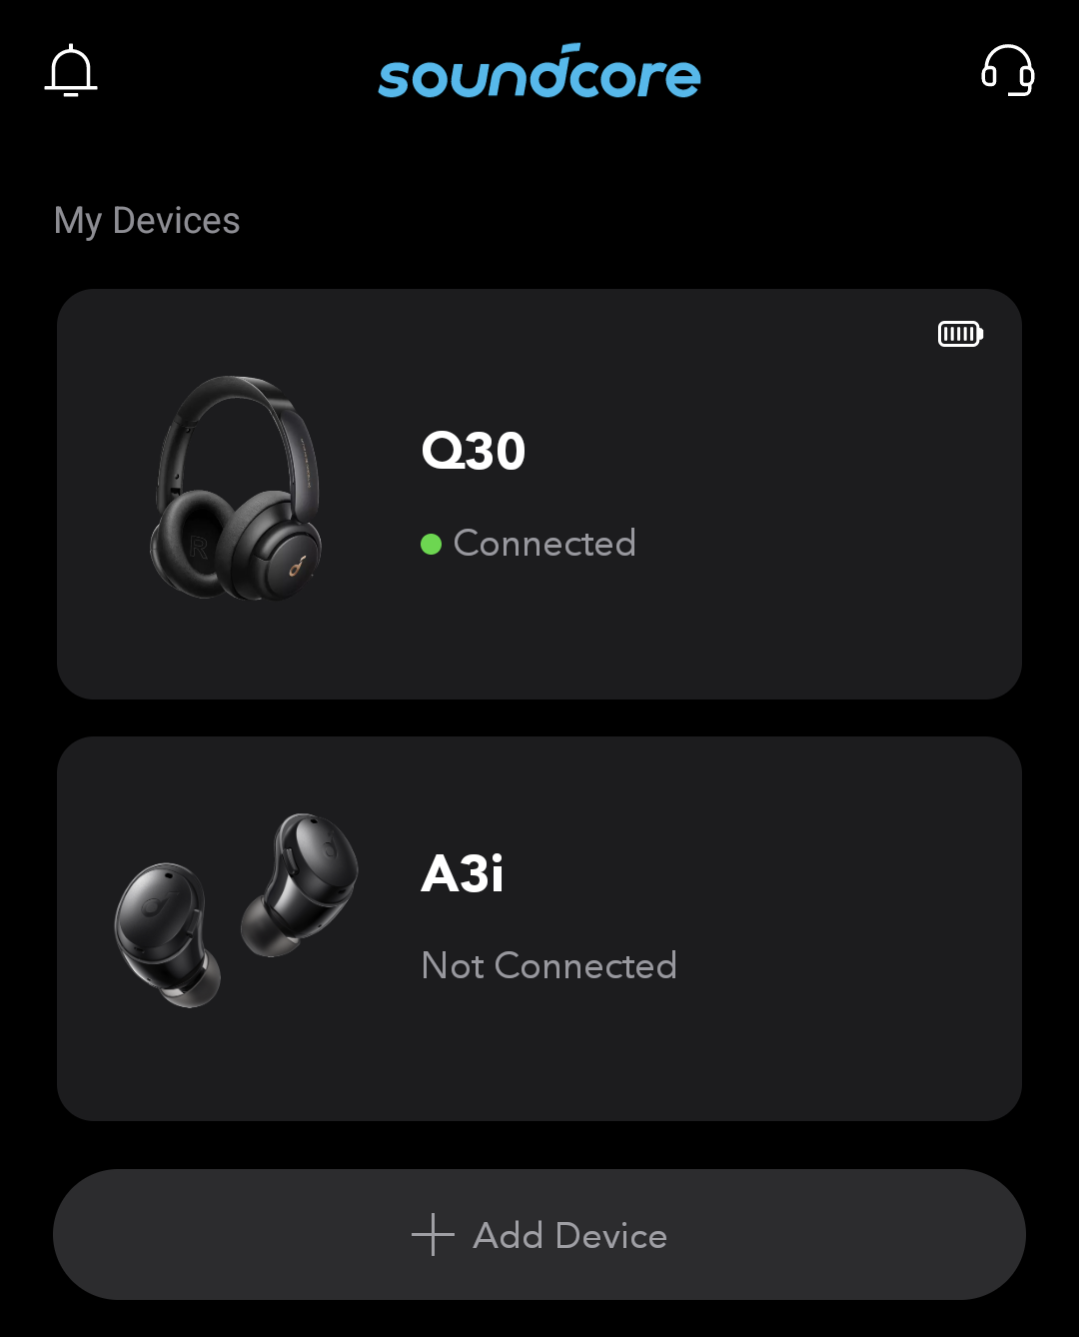 Screenshot showing the Soundcore logo in blue at the top, with a list of "my devices".  The top item shows a pair of headphones labelled Q30, with a full battery indicator and the word "connected" next to a green dot.  Underneath is another device photo of ear buds with "A3i" and "not connected".